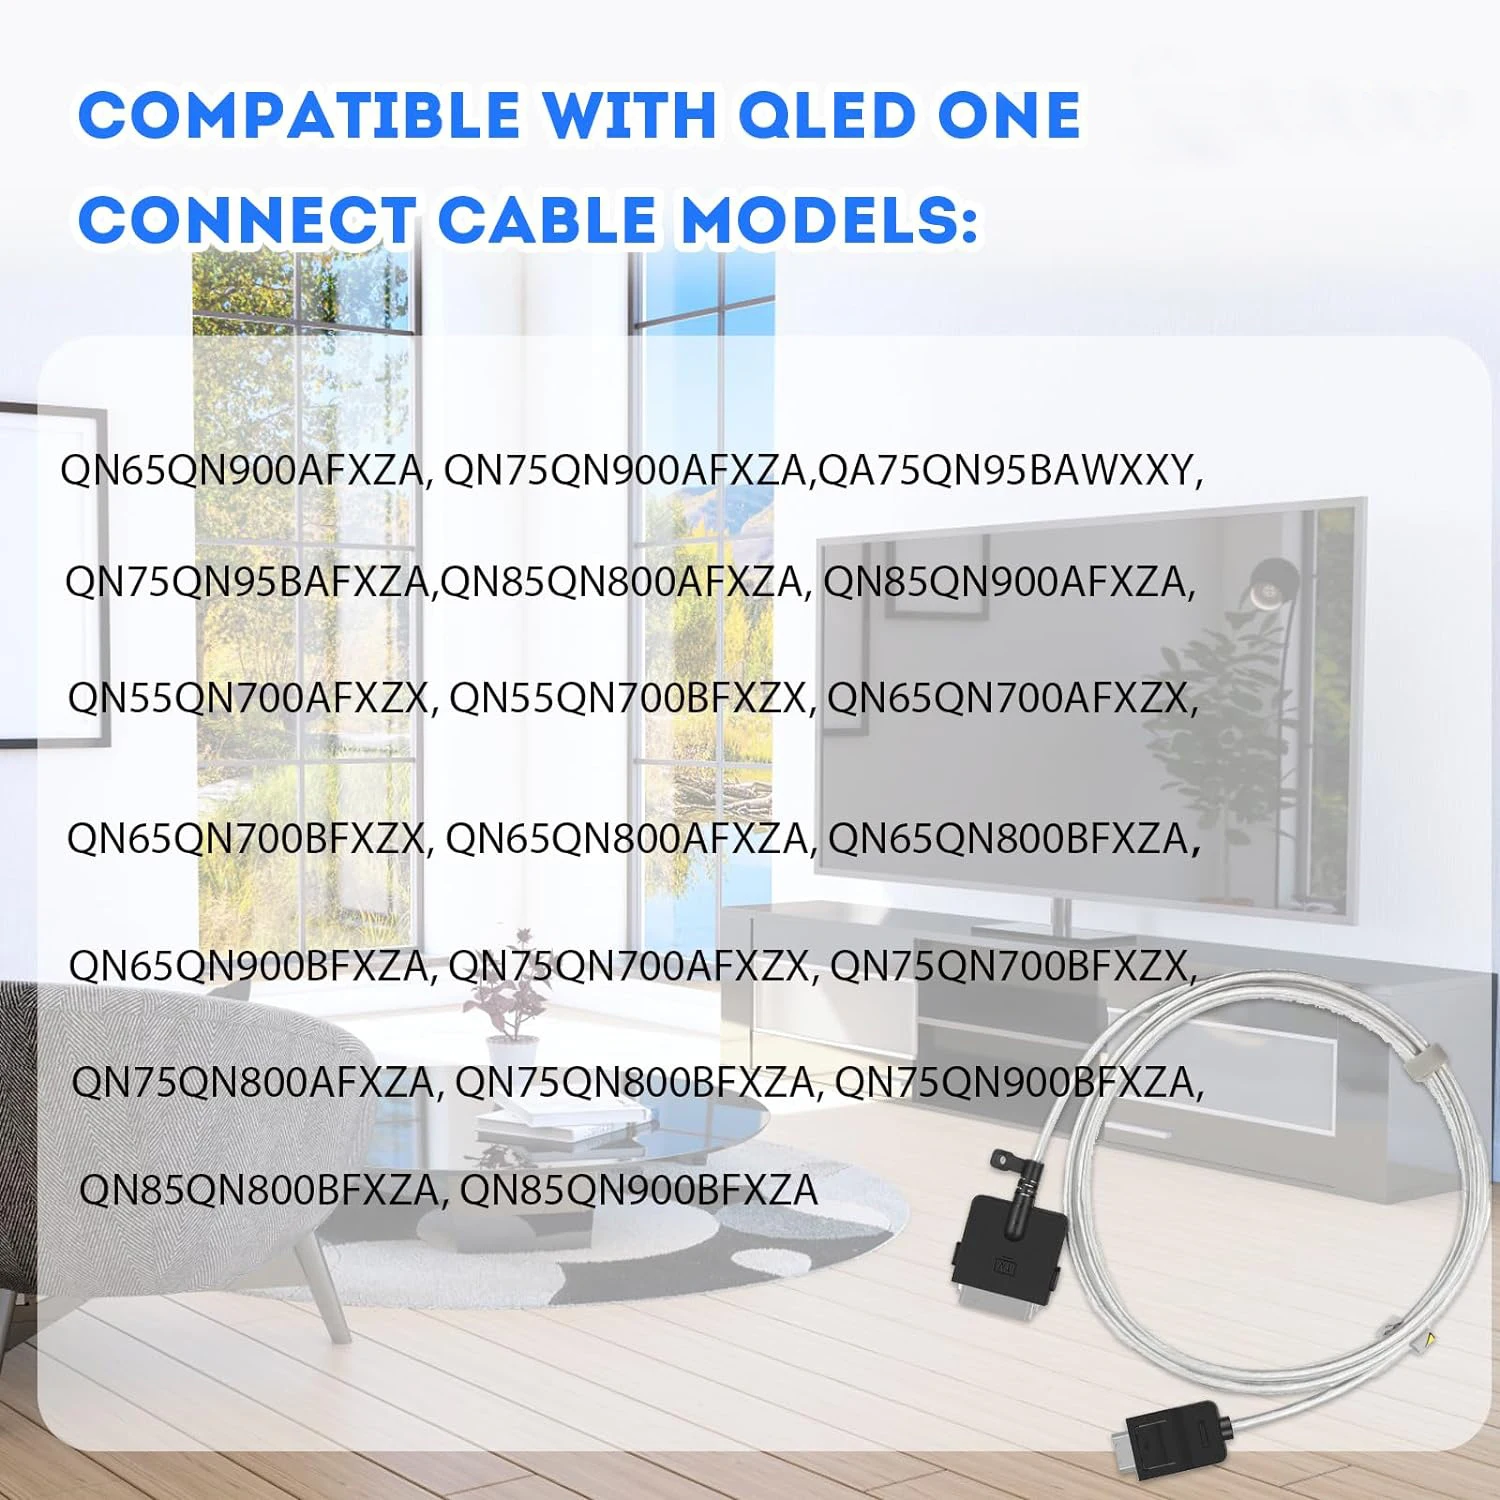 

Original Brand New BN39-02688A = BN39-02688B Connect Cable is for Neo QLED 8K Smart TV QN900A, QN800A, QN700A QN95A Series TV